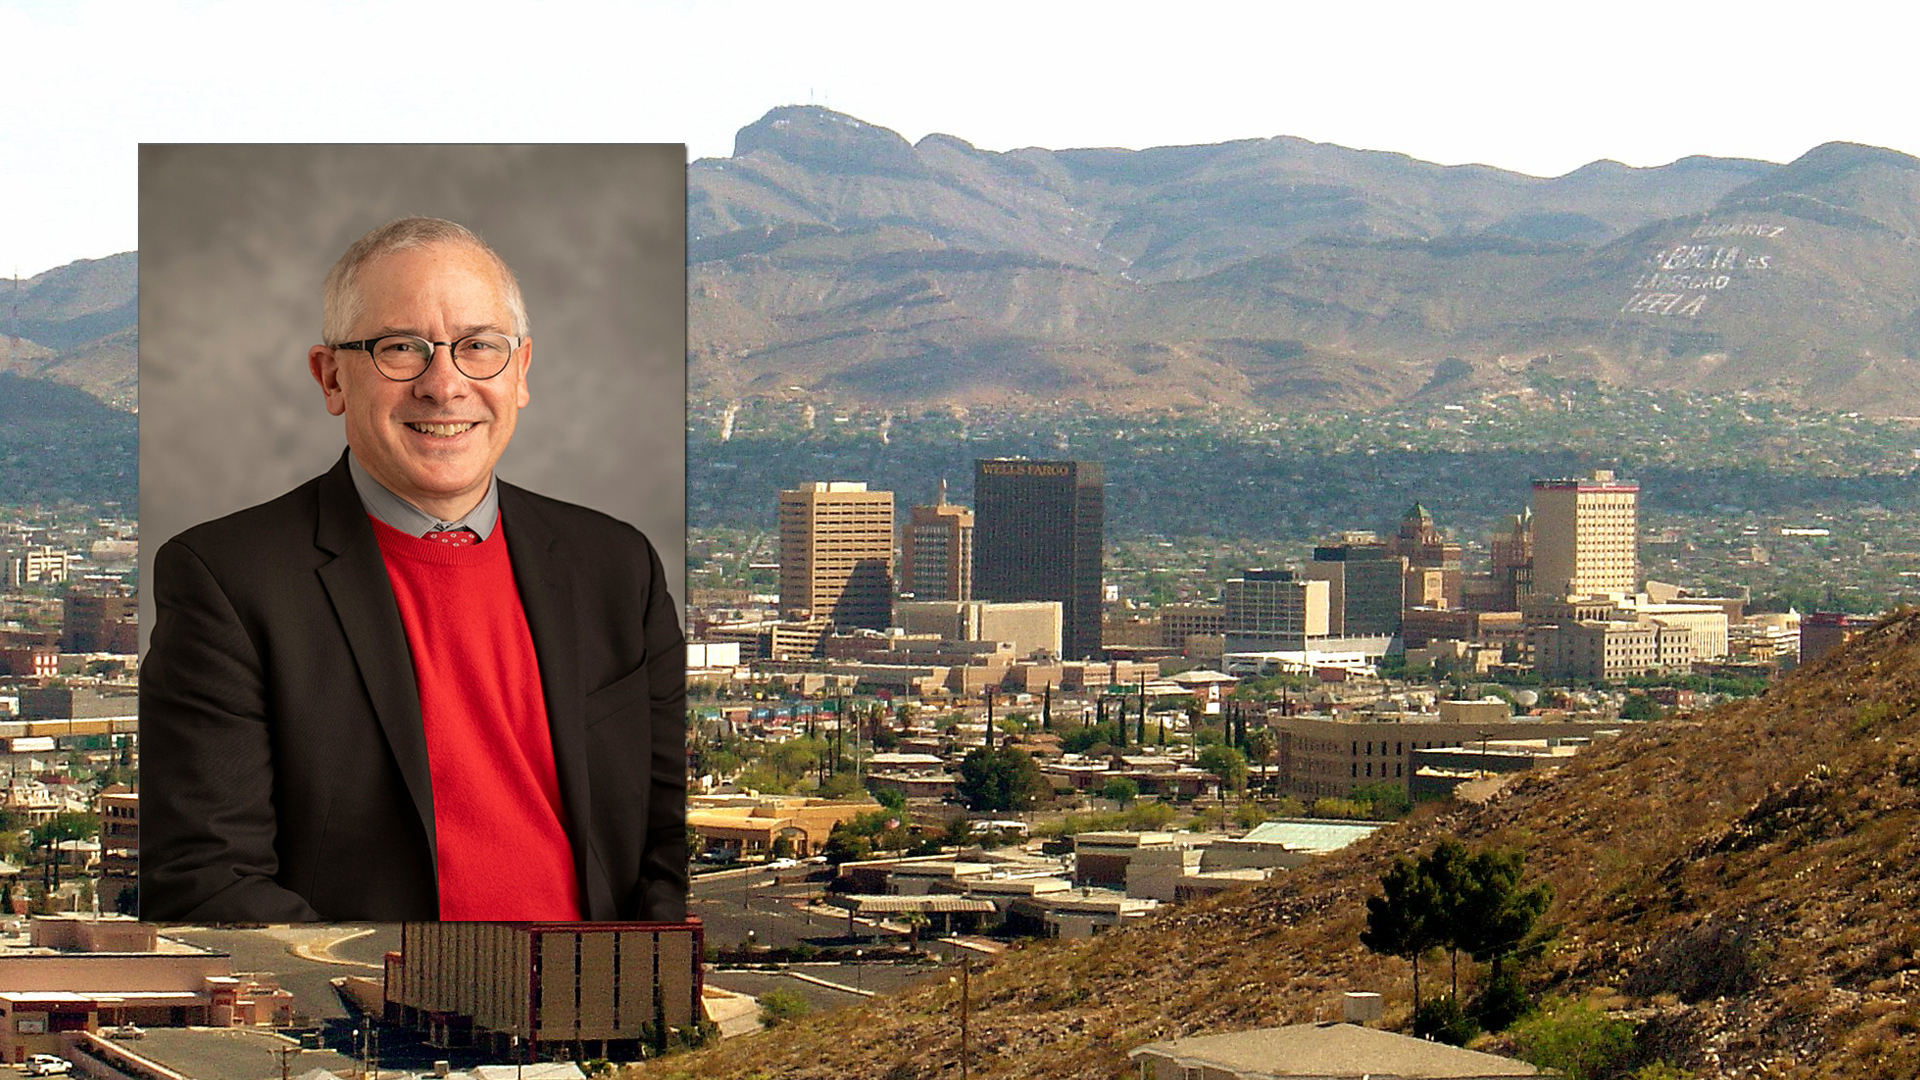 Alumnus James Holloway named Provost at University of New Mexico